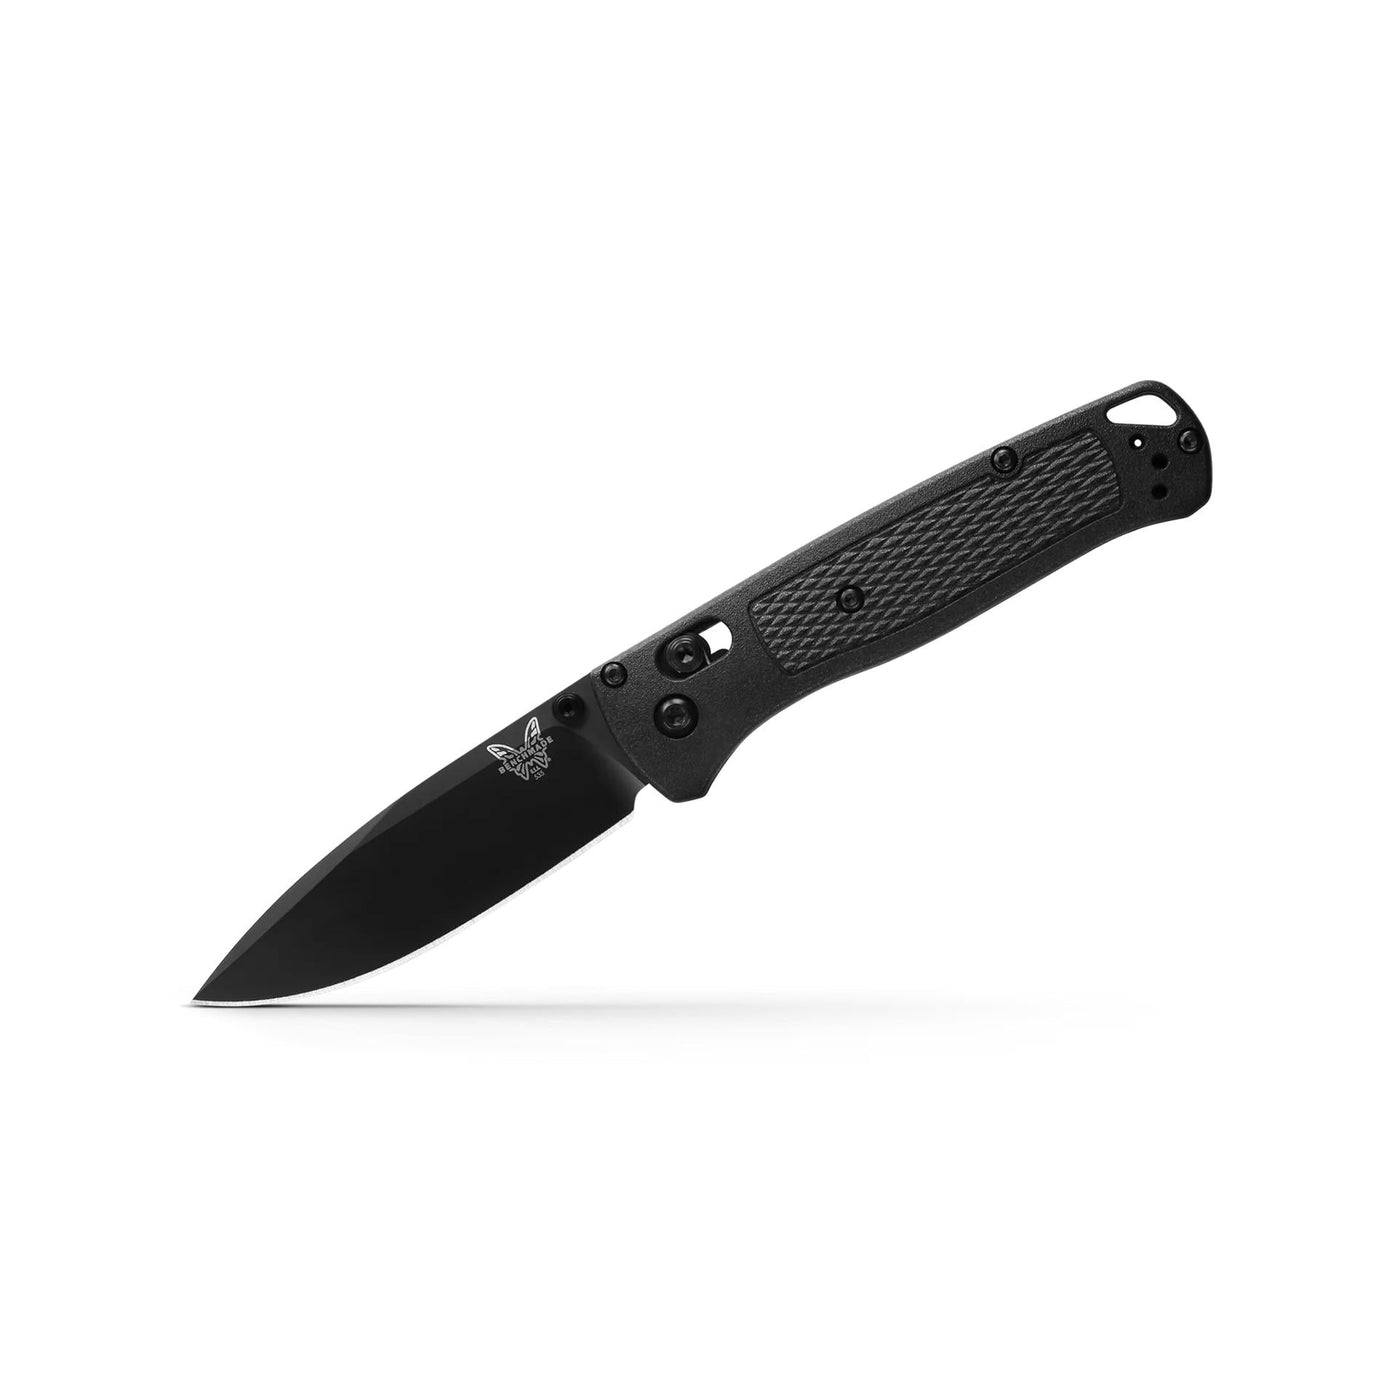 Benchmade Bugout Knife-Knives & Tools-535BK-2-Kevin's Fine Outdoor Gear & Apparel